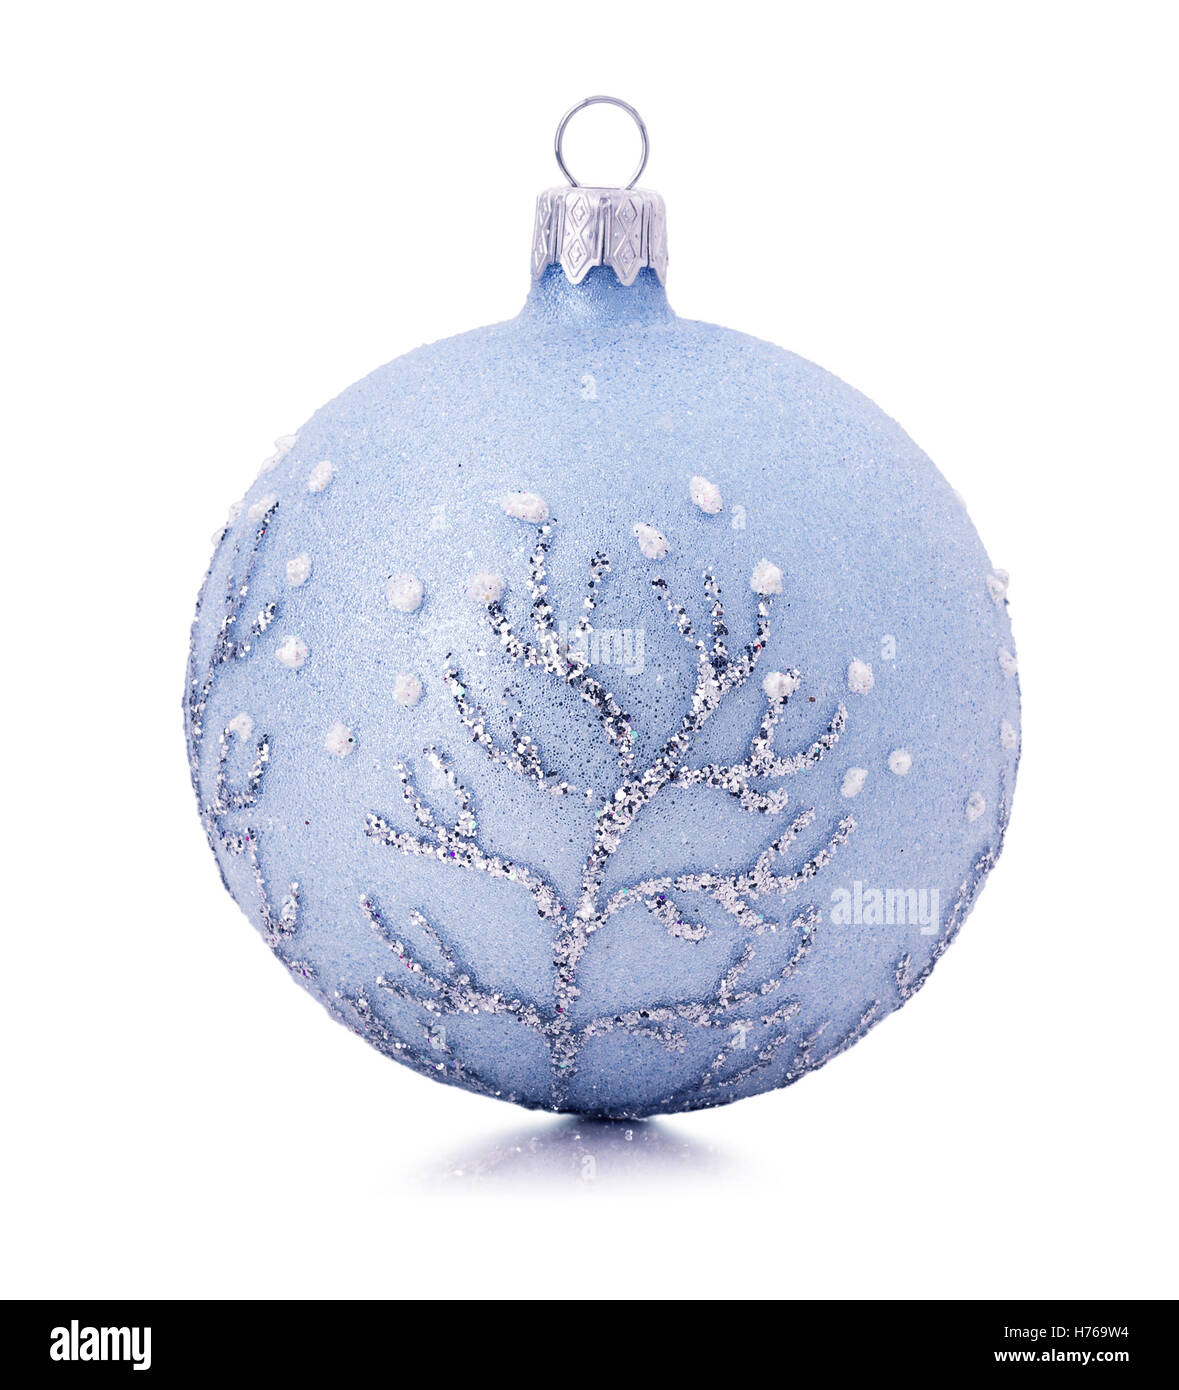 blue Christmas tree ball isolated on the white background. Stock Photo